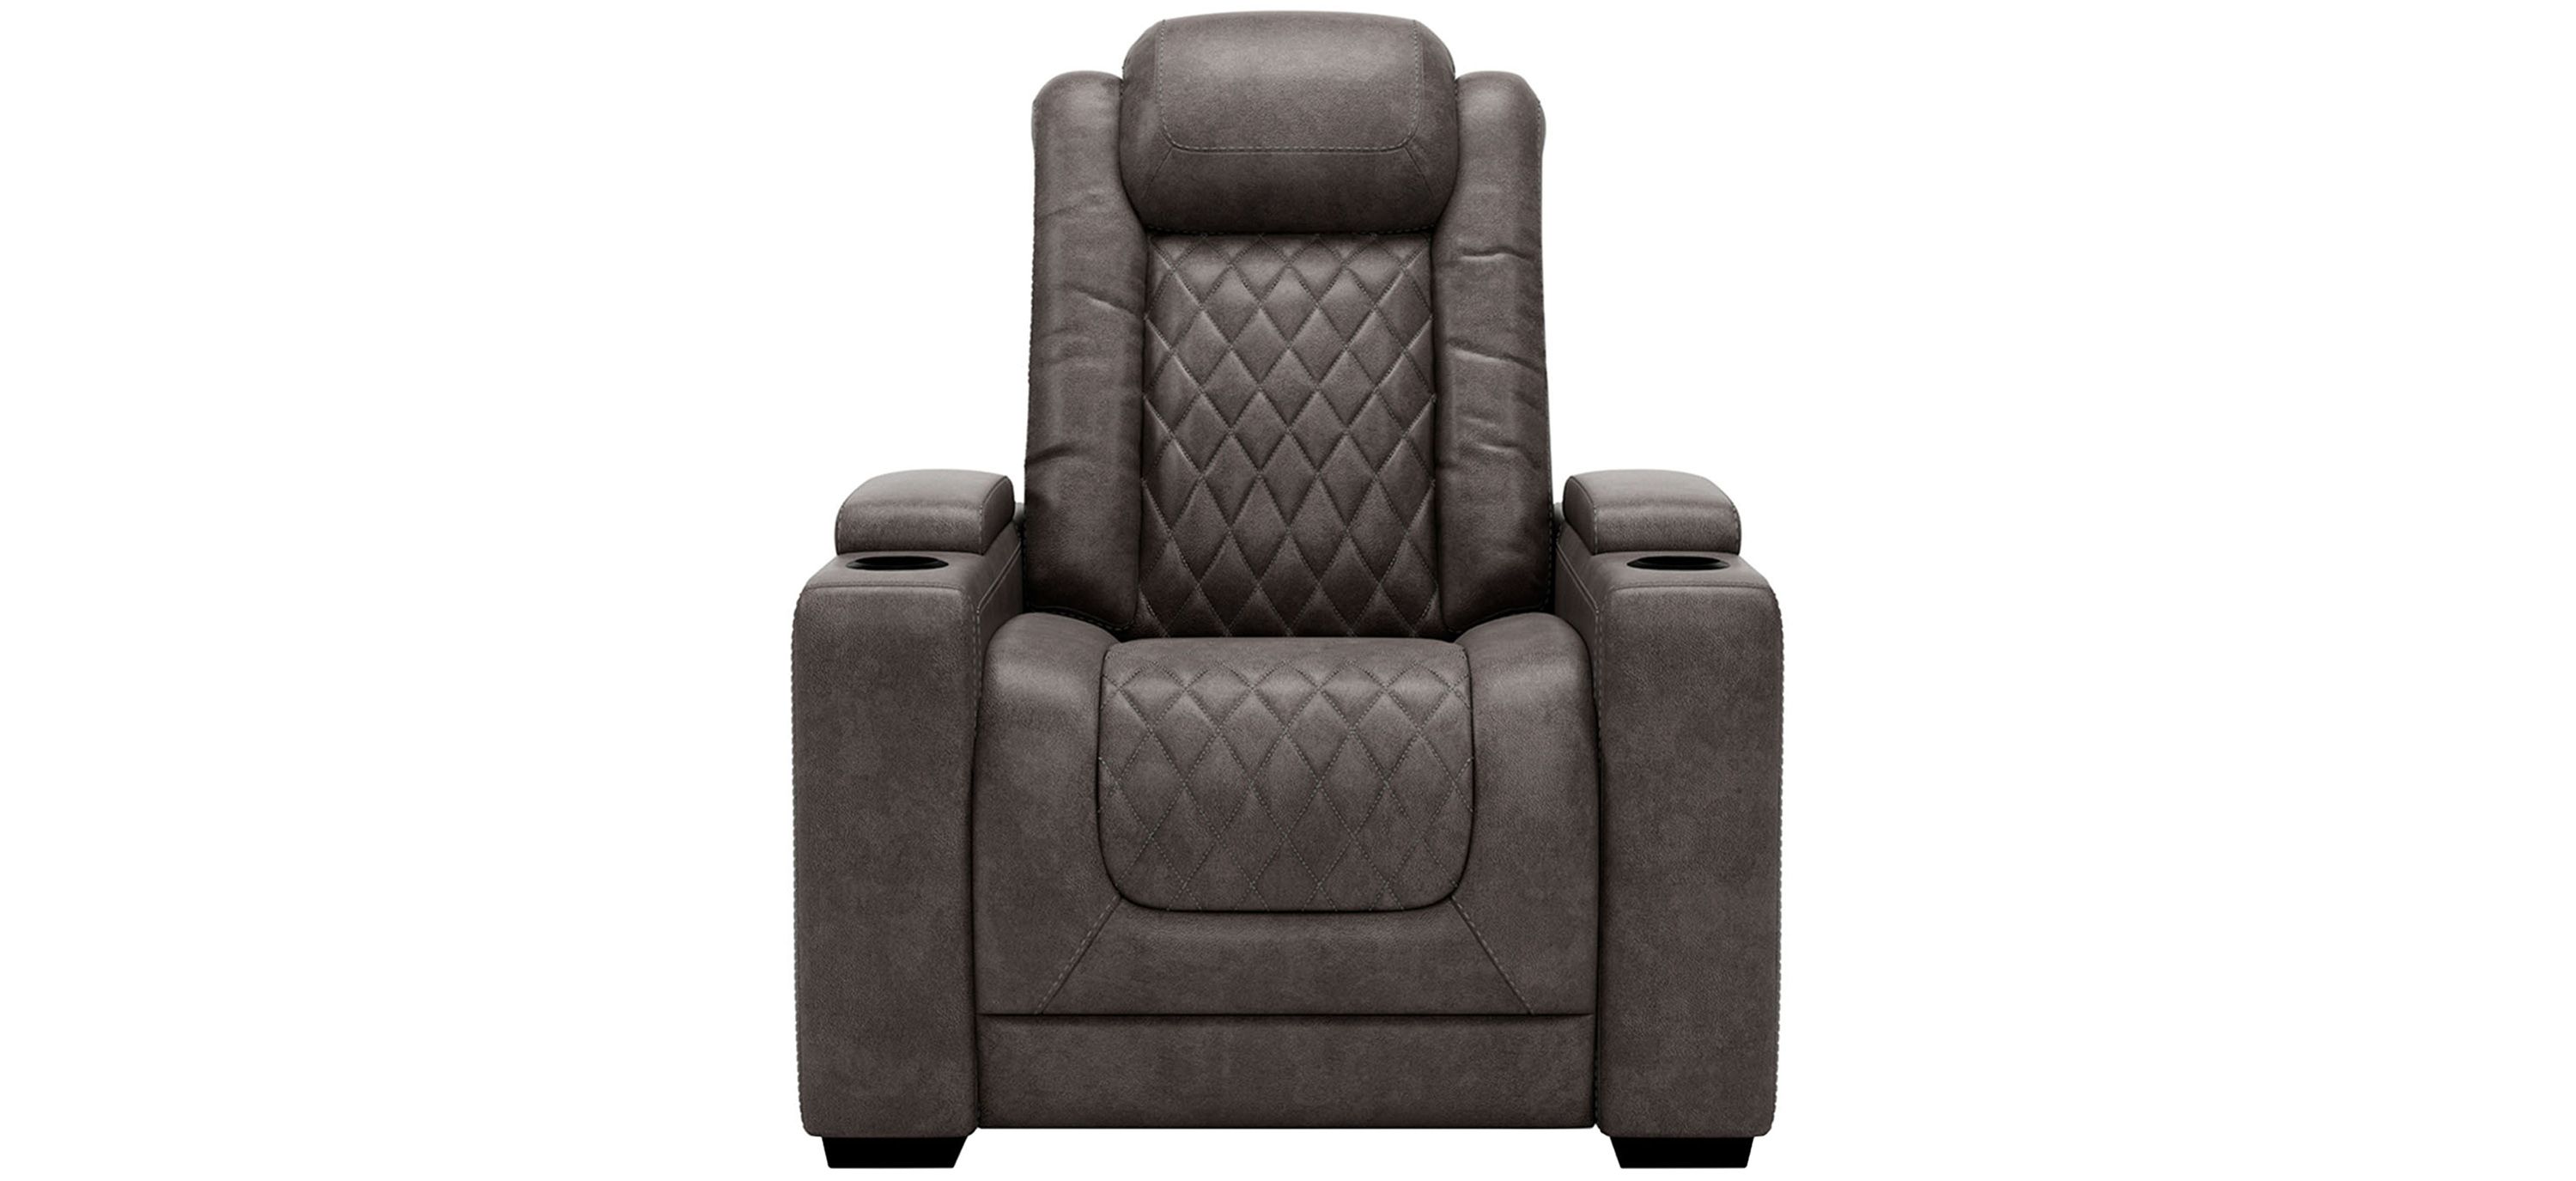 Corsica Contemporary Power Recliner with Adjustable Headrest - Gray